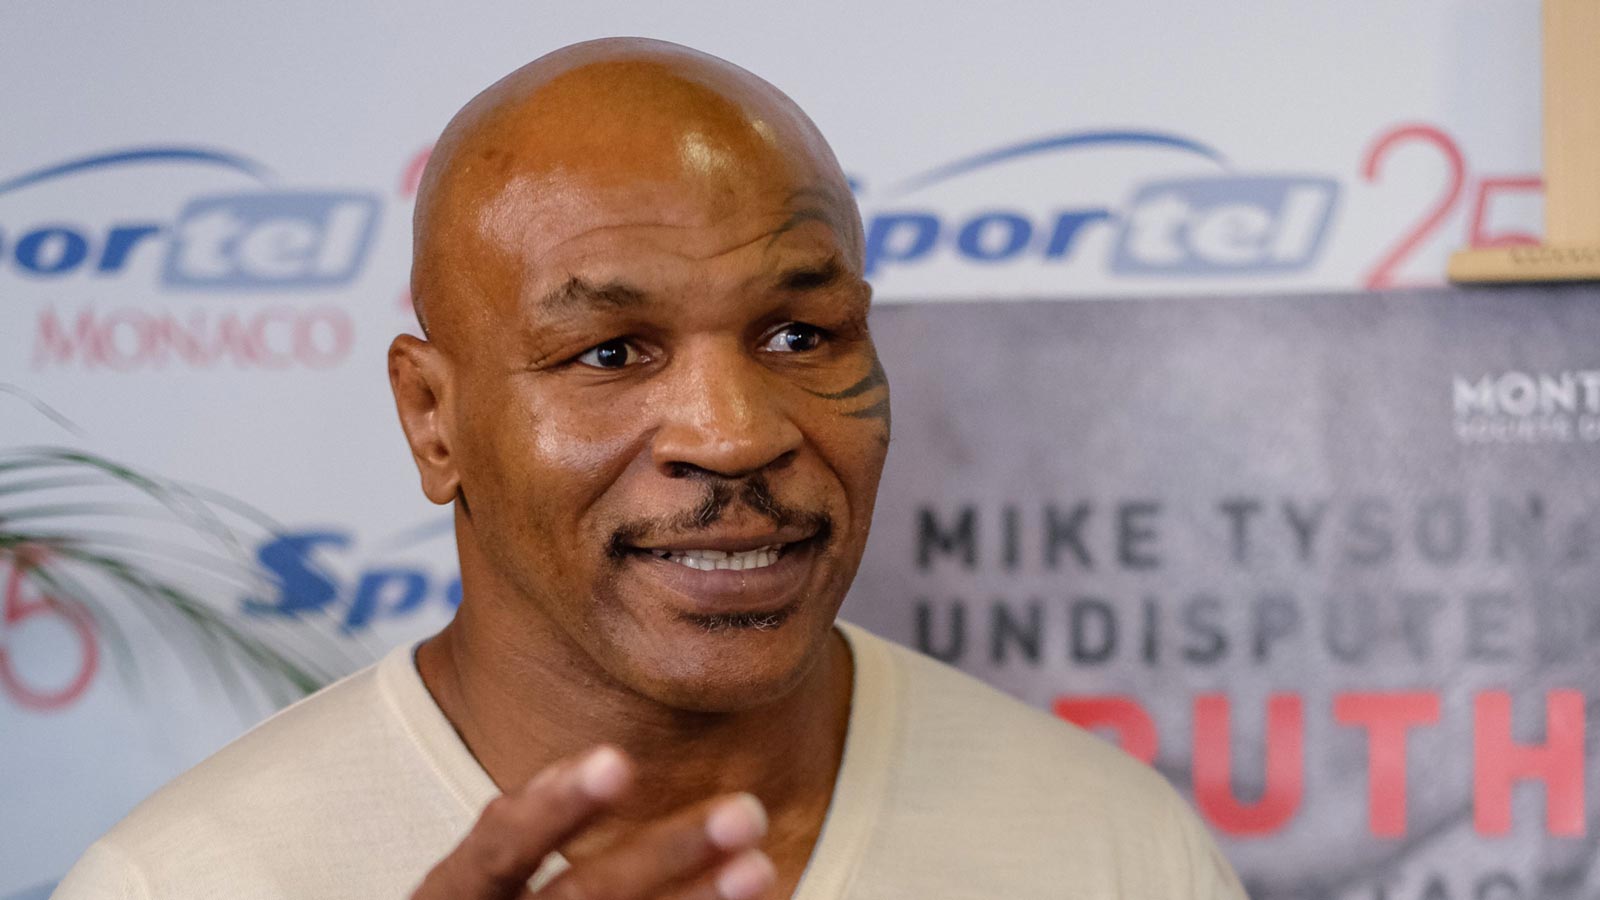 Mike Tyson | Didier Baverel/Getty Images